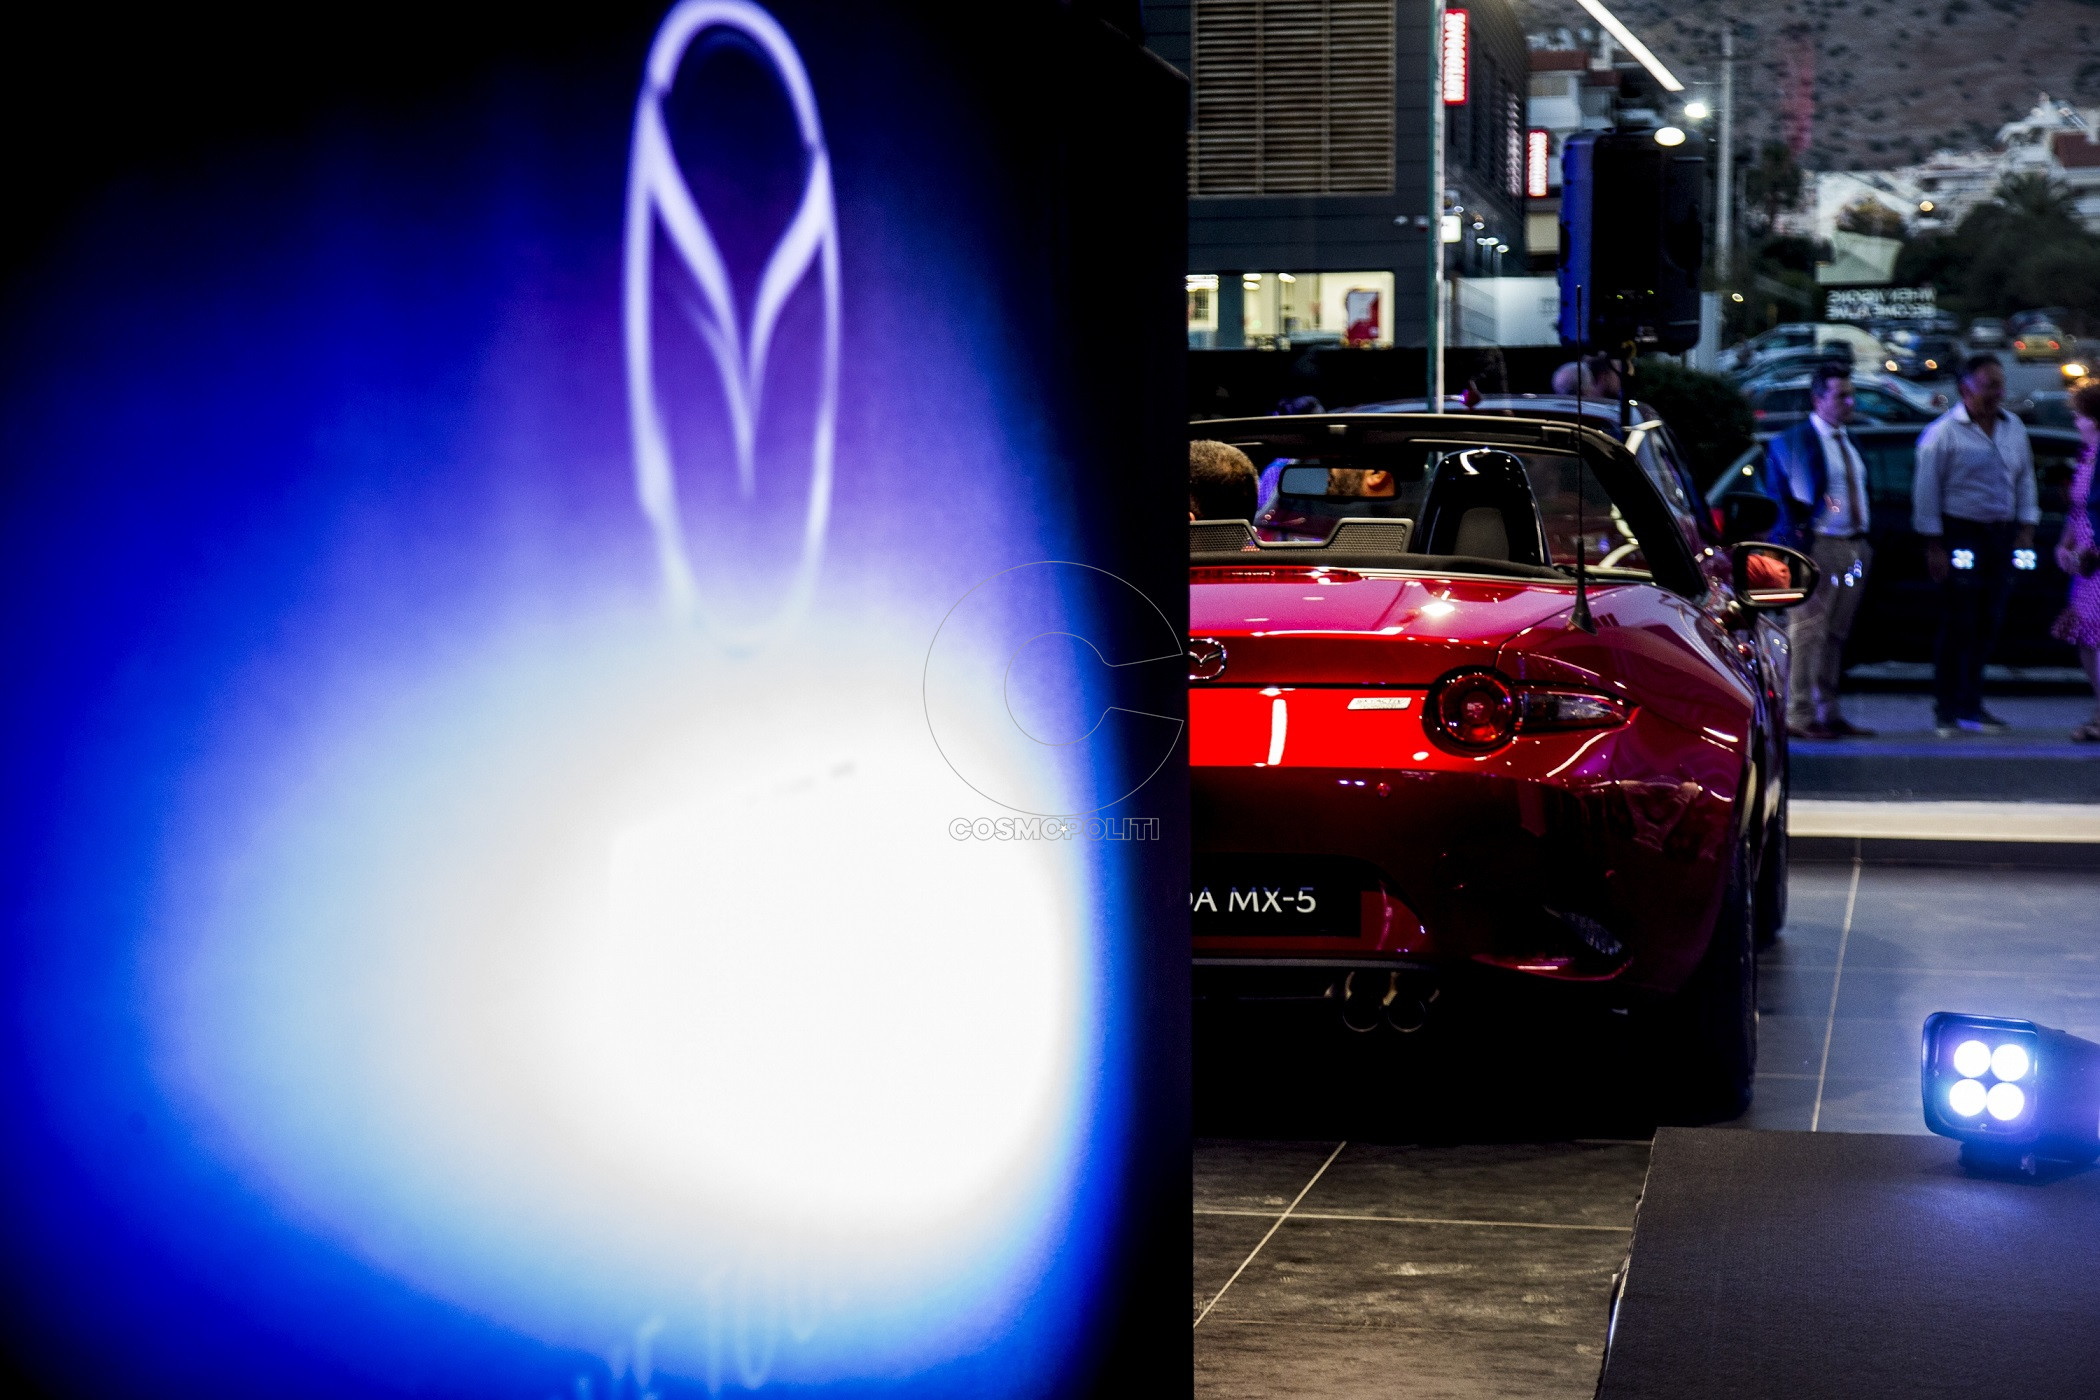 07. 2019.06.06 _ Mazda Store - Opening Event